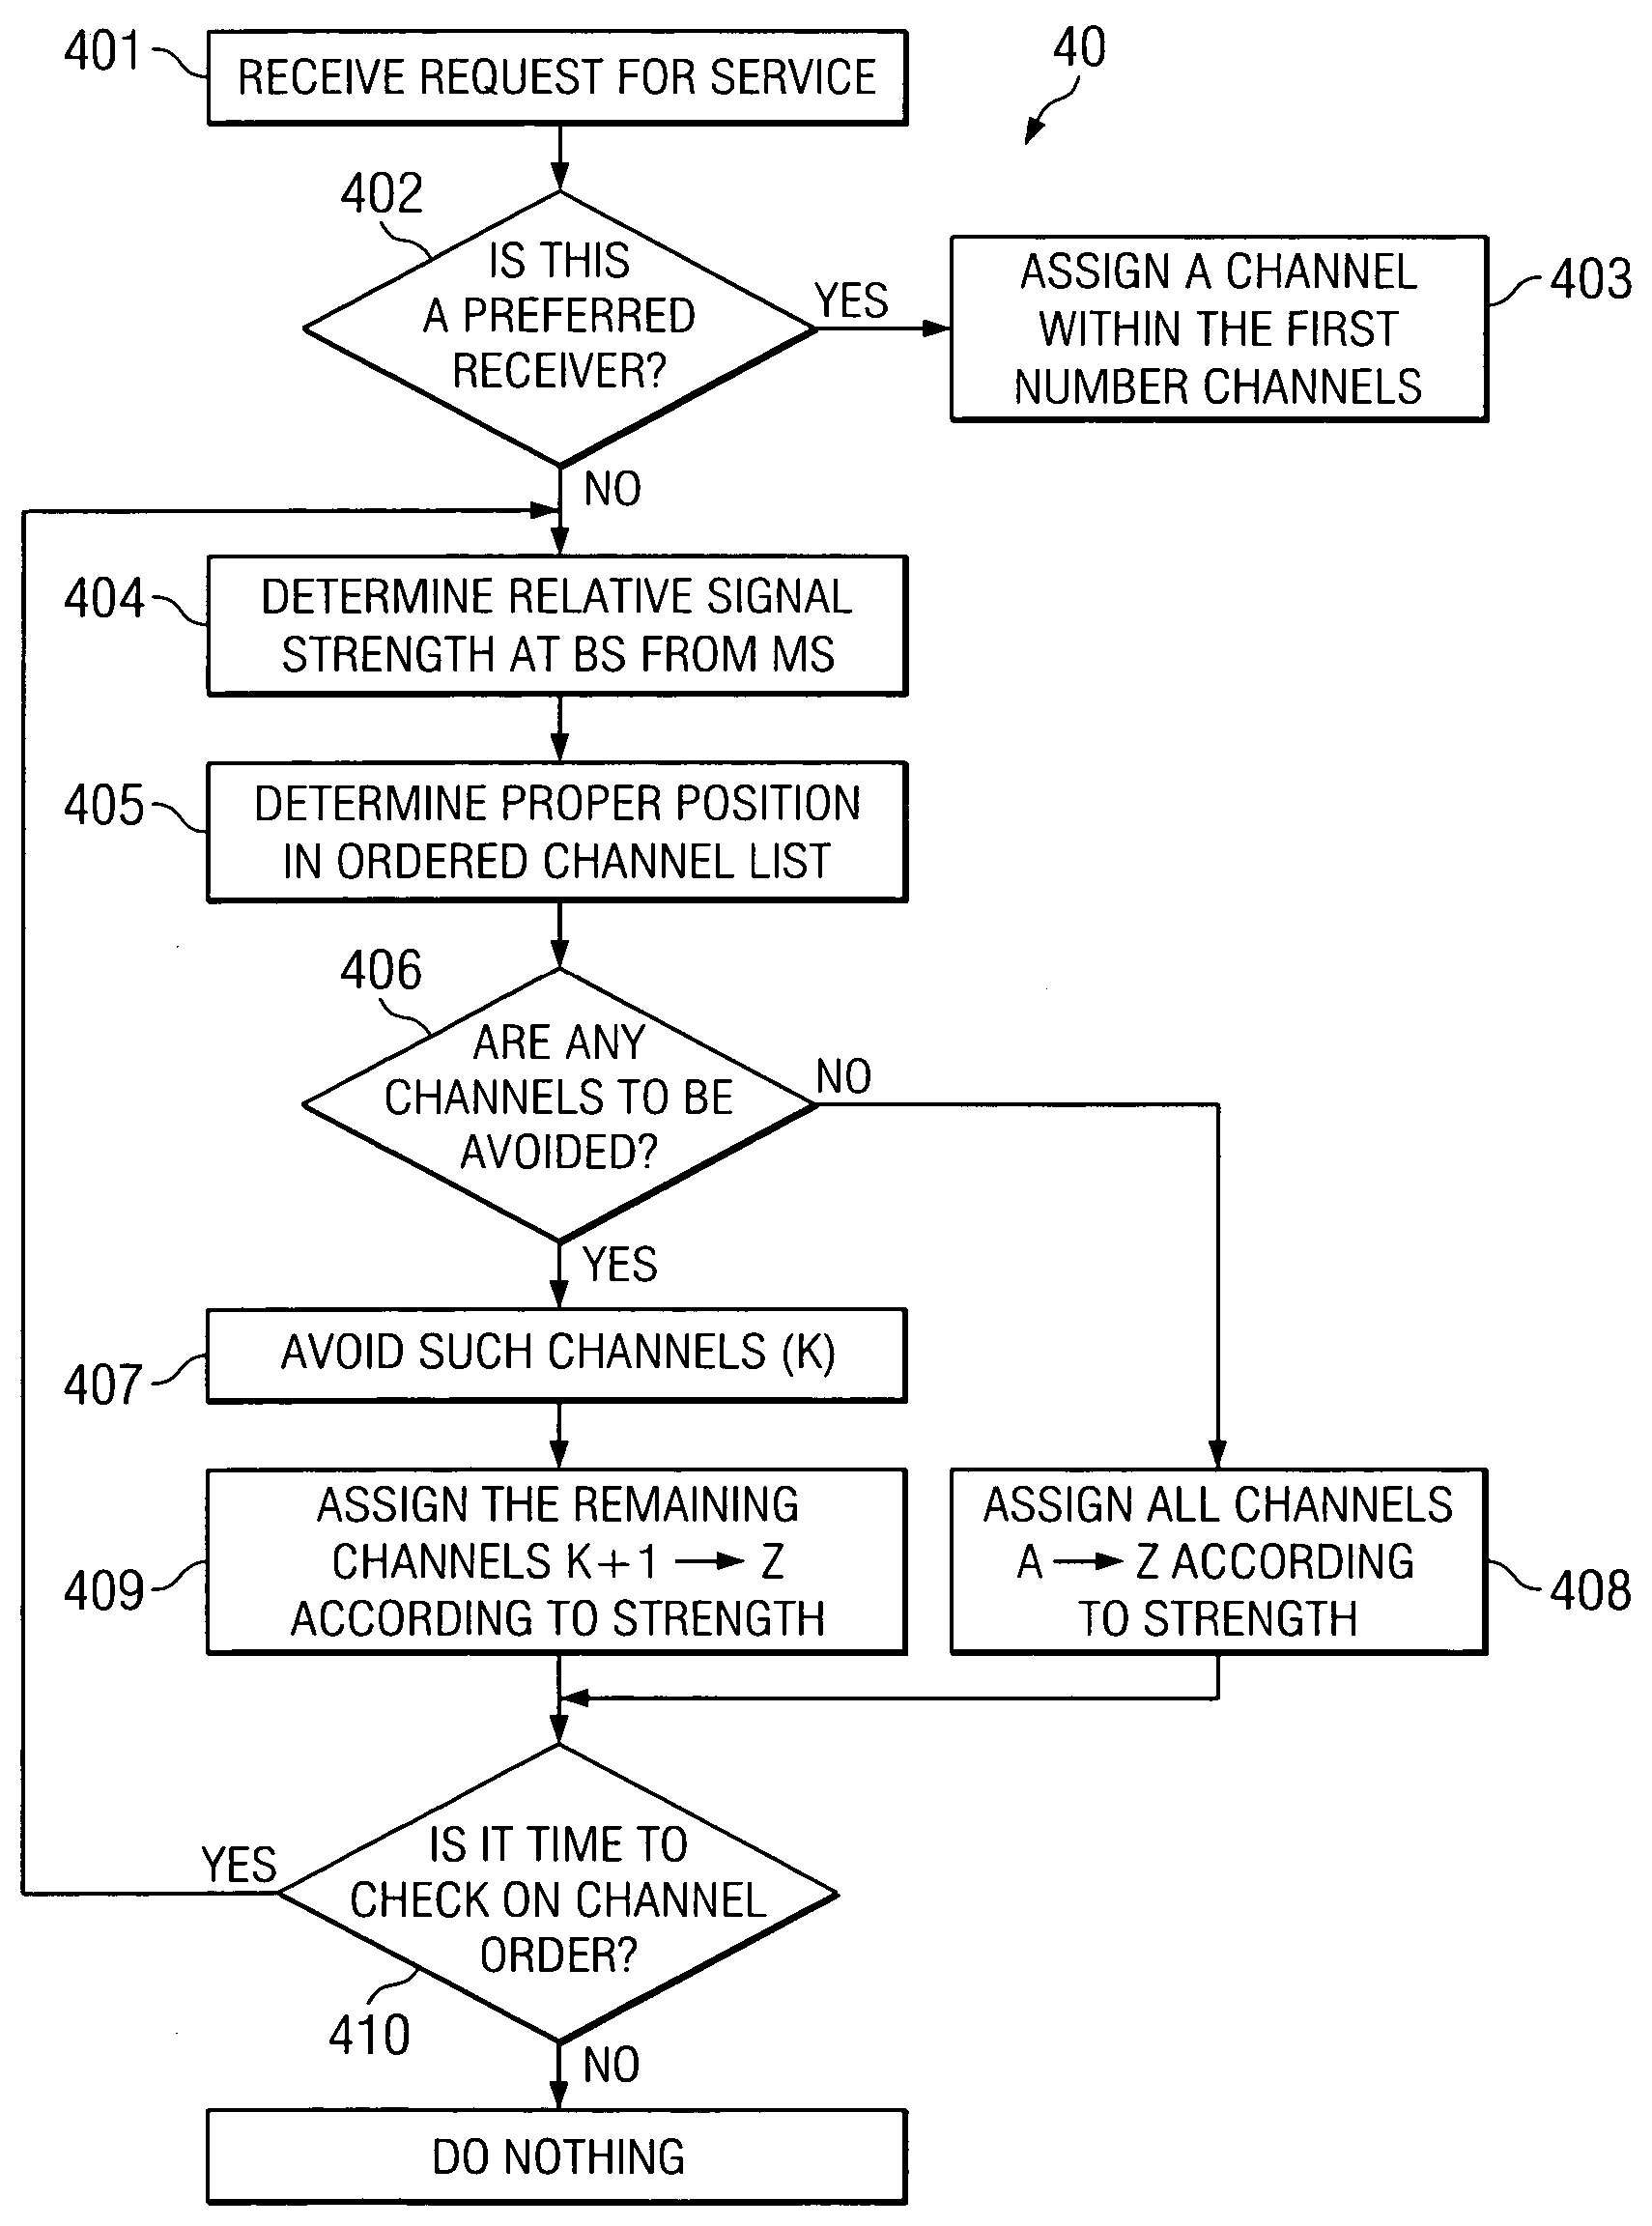 Systems and methods for making channel assignments to reduce interference and increase capacity of wireless networks